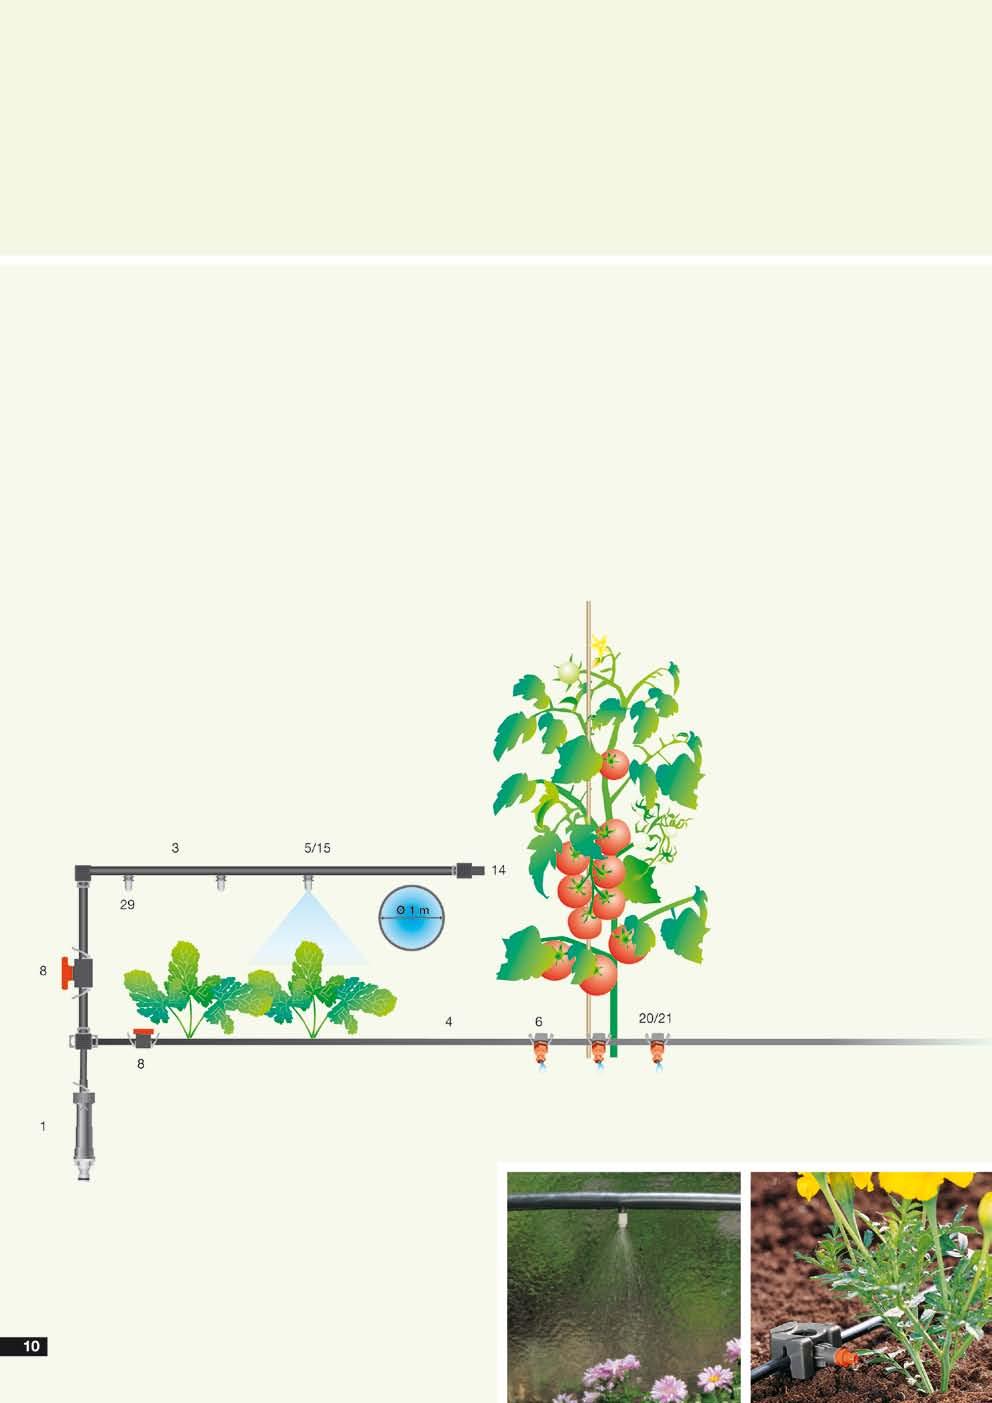 Extremely versatile for greenhouses, Irrigation suitable for greenhouses Note: and plant troughs, bushes, and shrubs Accurate watering for smaller areas Seedlings flourish best in the greenhouse when